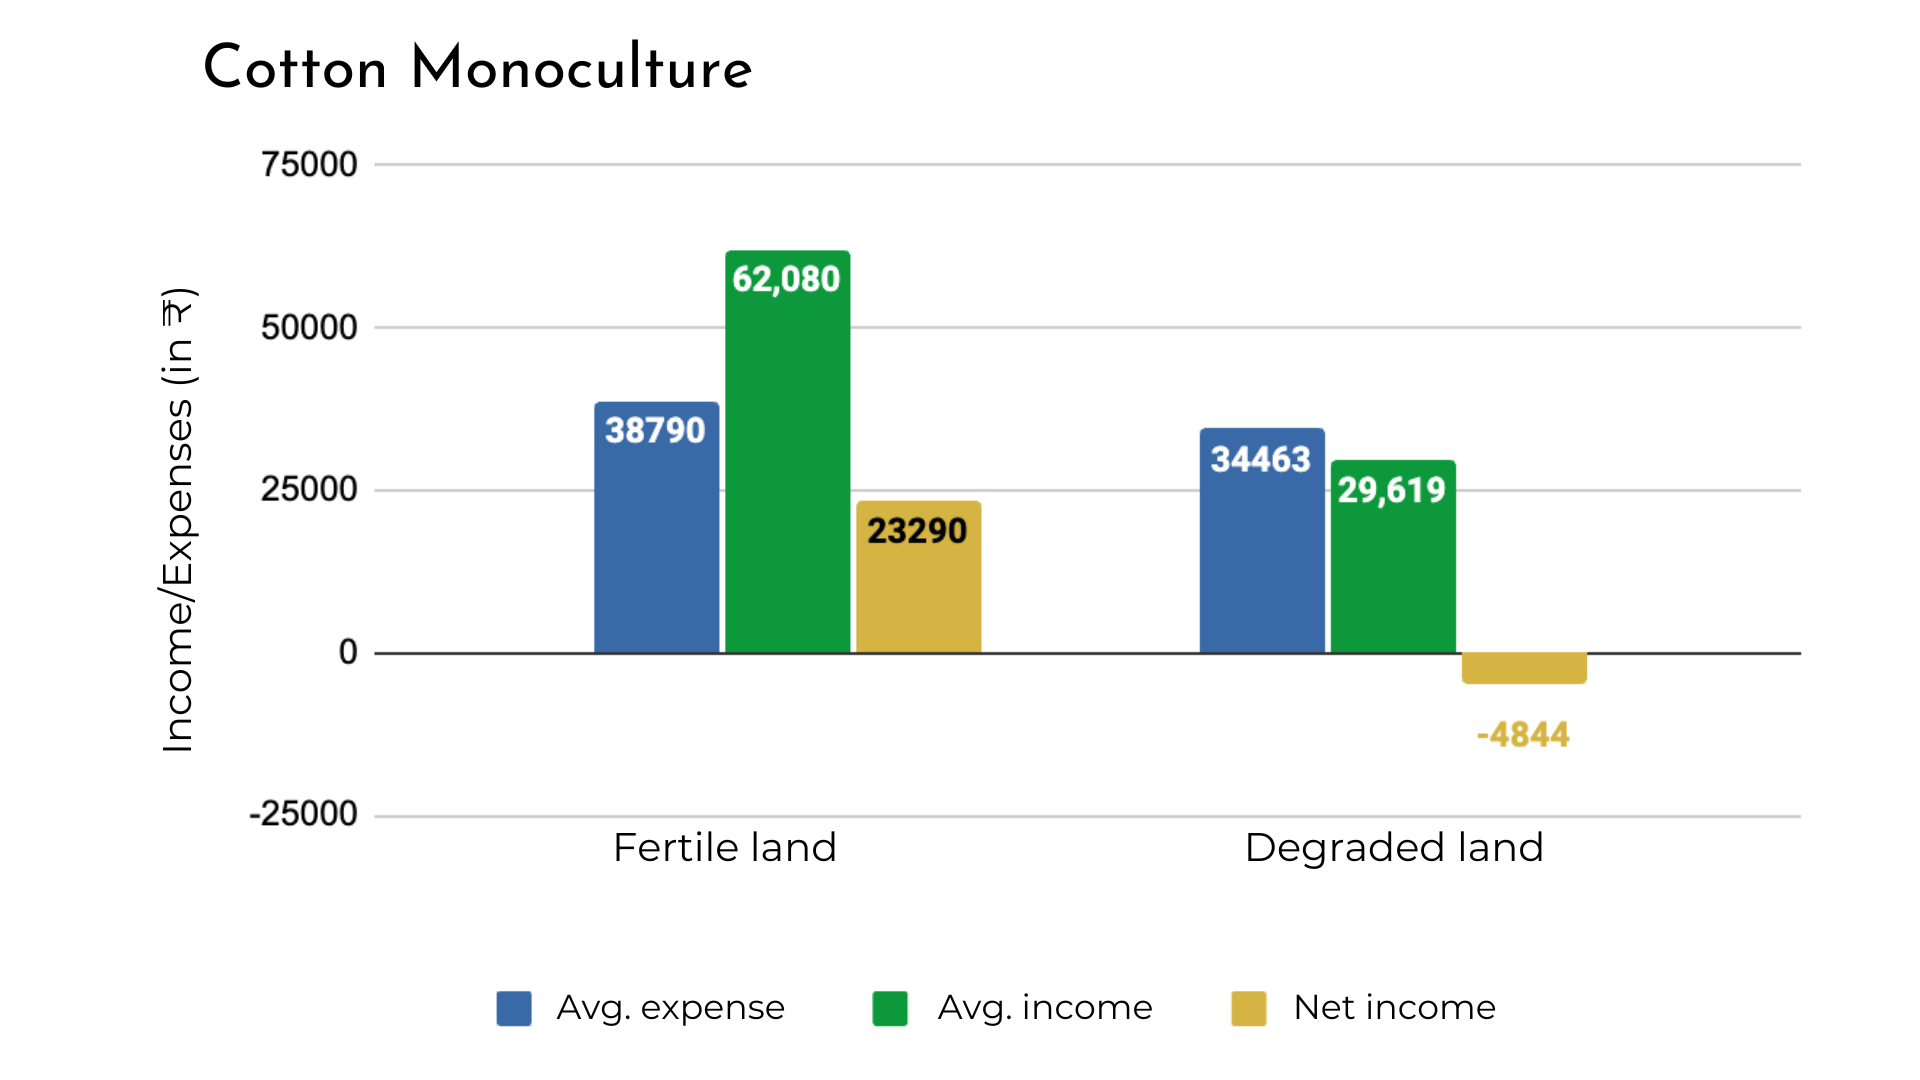 The difference in net income that can be earned from cotton cultivation in fertile and degraded land.